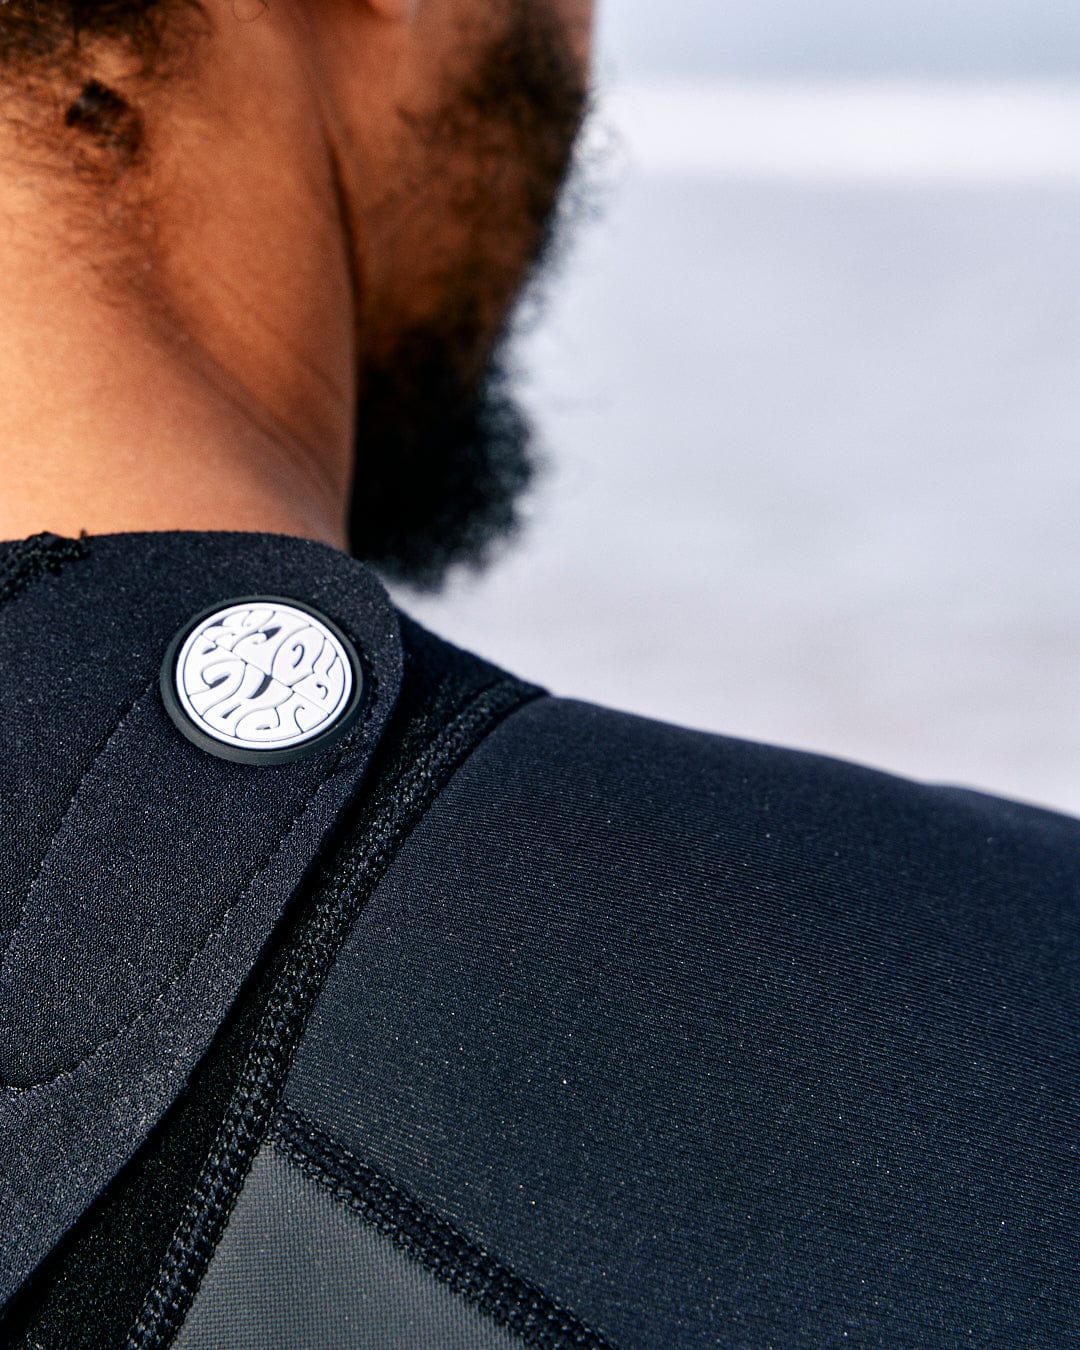 Close-up of a person wearing a black neoprene shoulder brace with a white circular logo on the strap.